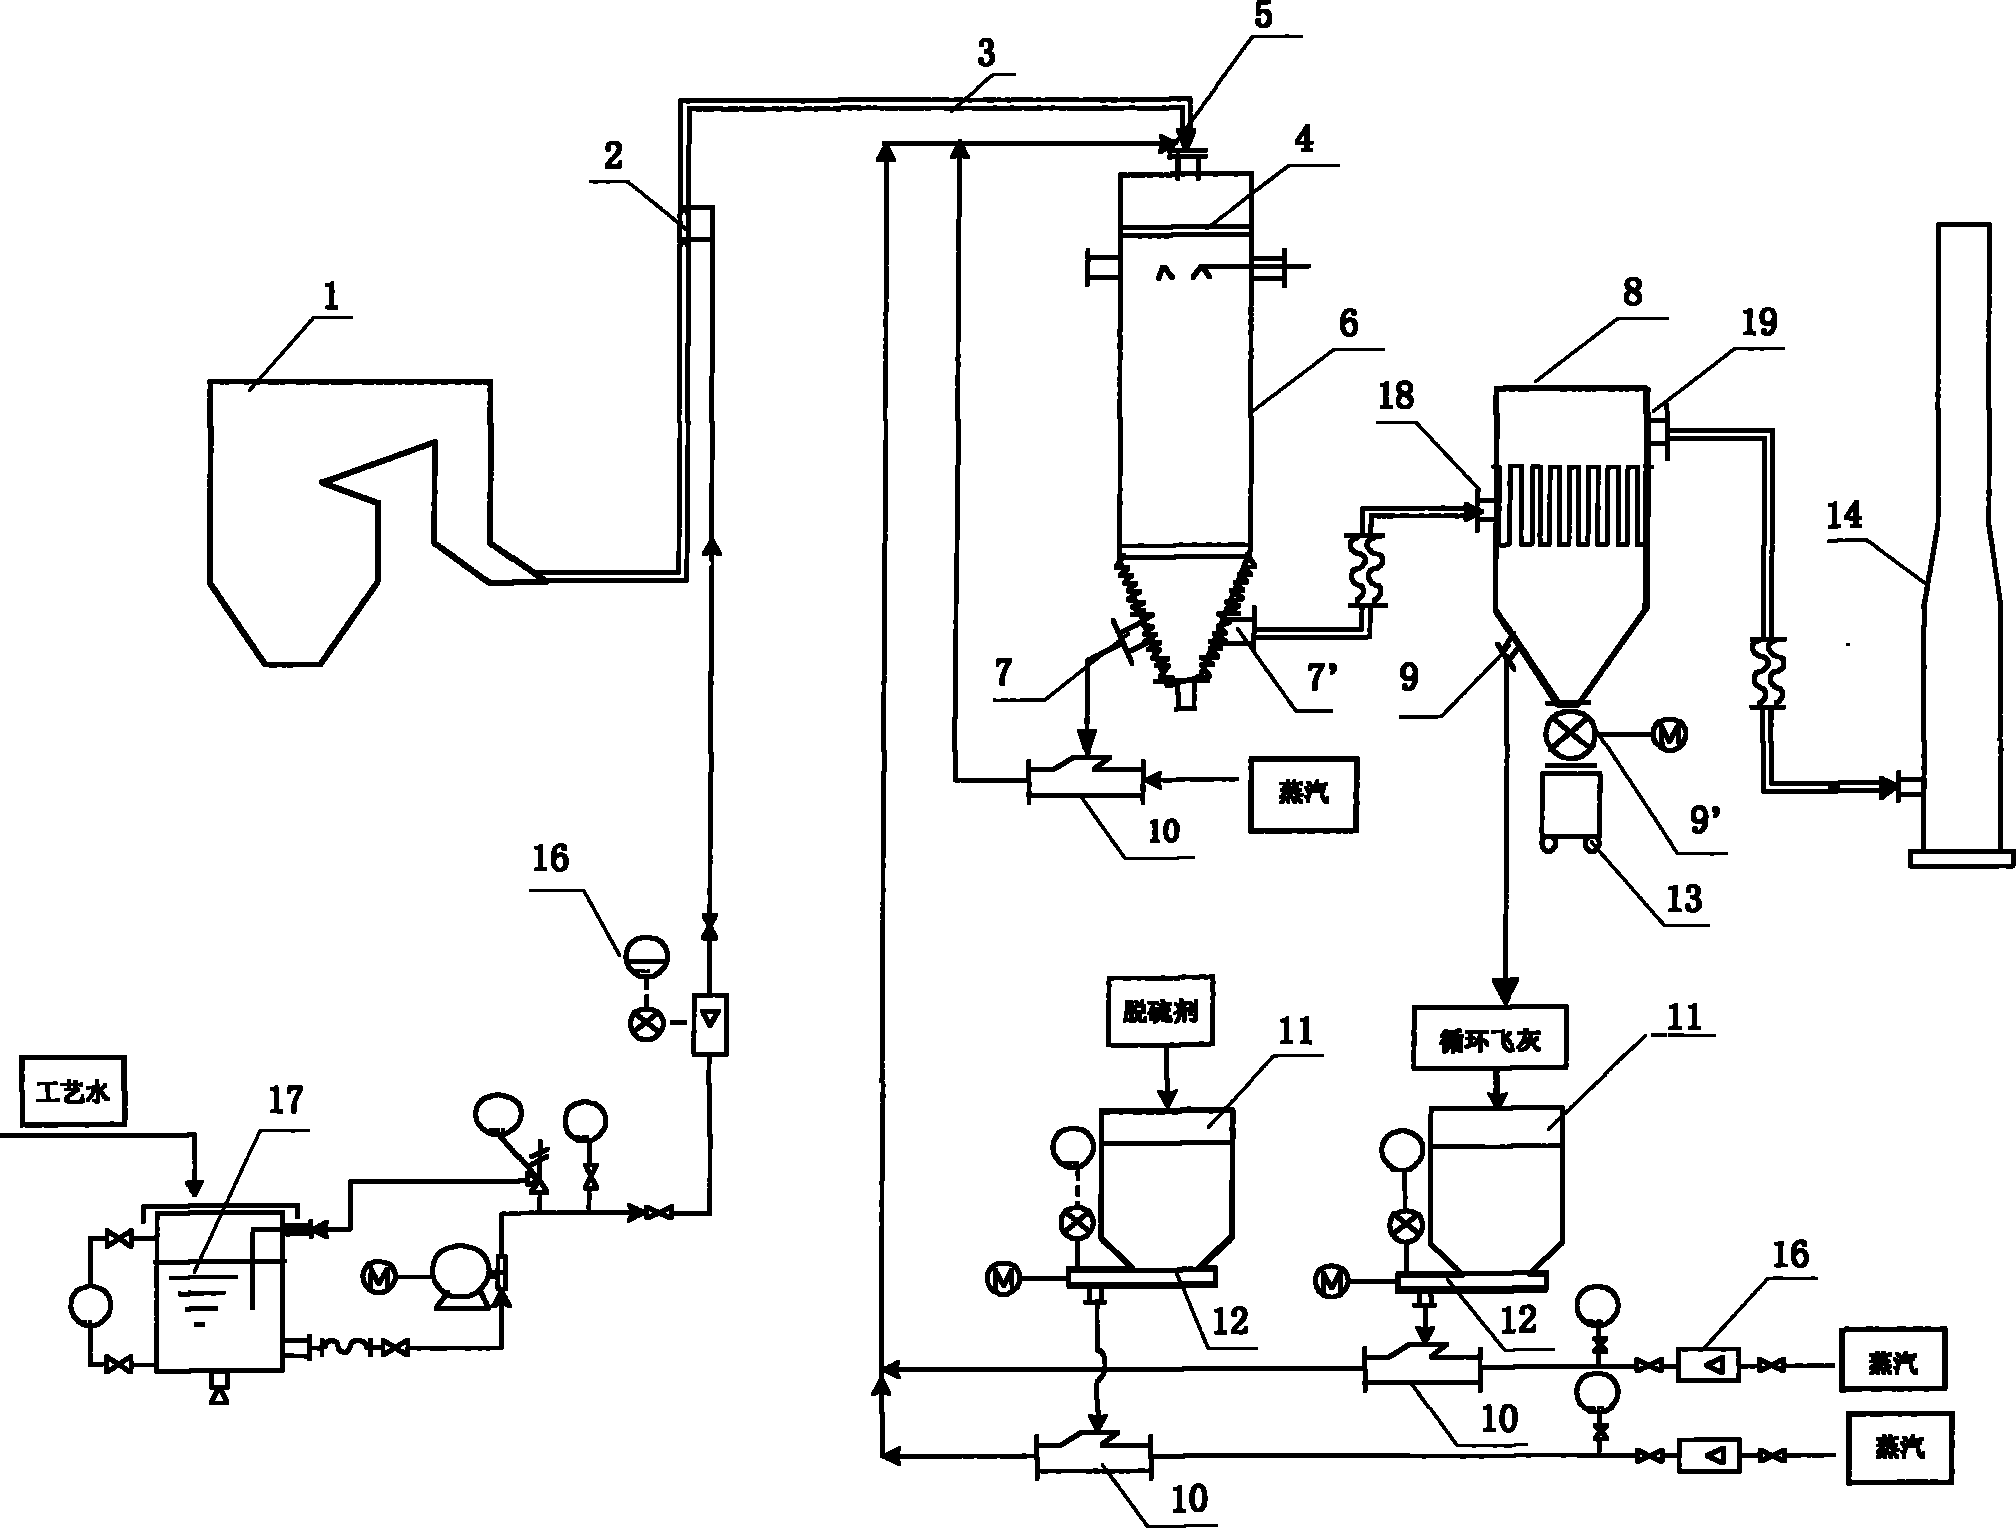 Desulfurization and demercuration method for flue gas